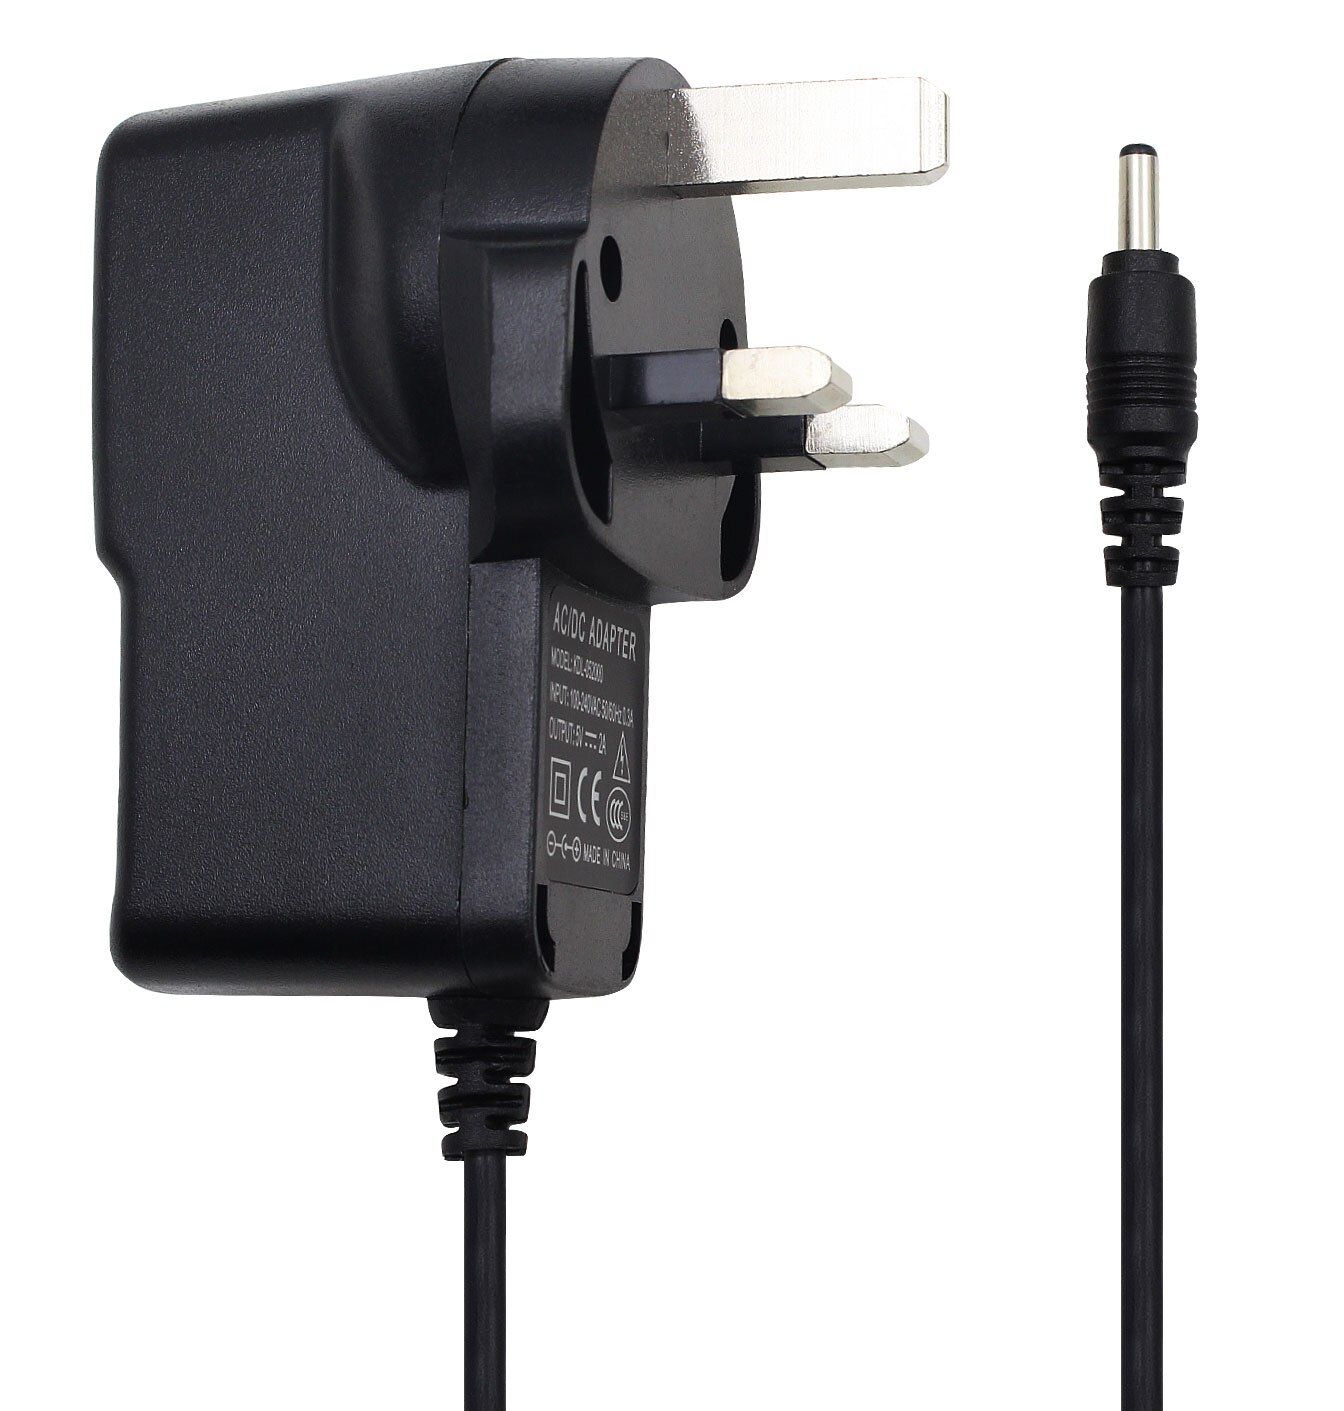 2m USB Black Charger Power Cable for BT 450 Baby's Unit Digital Baby Monitor 